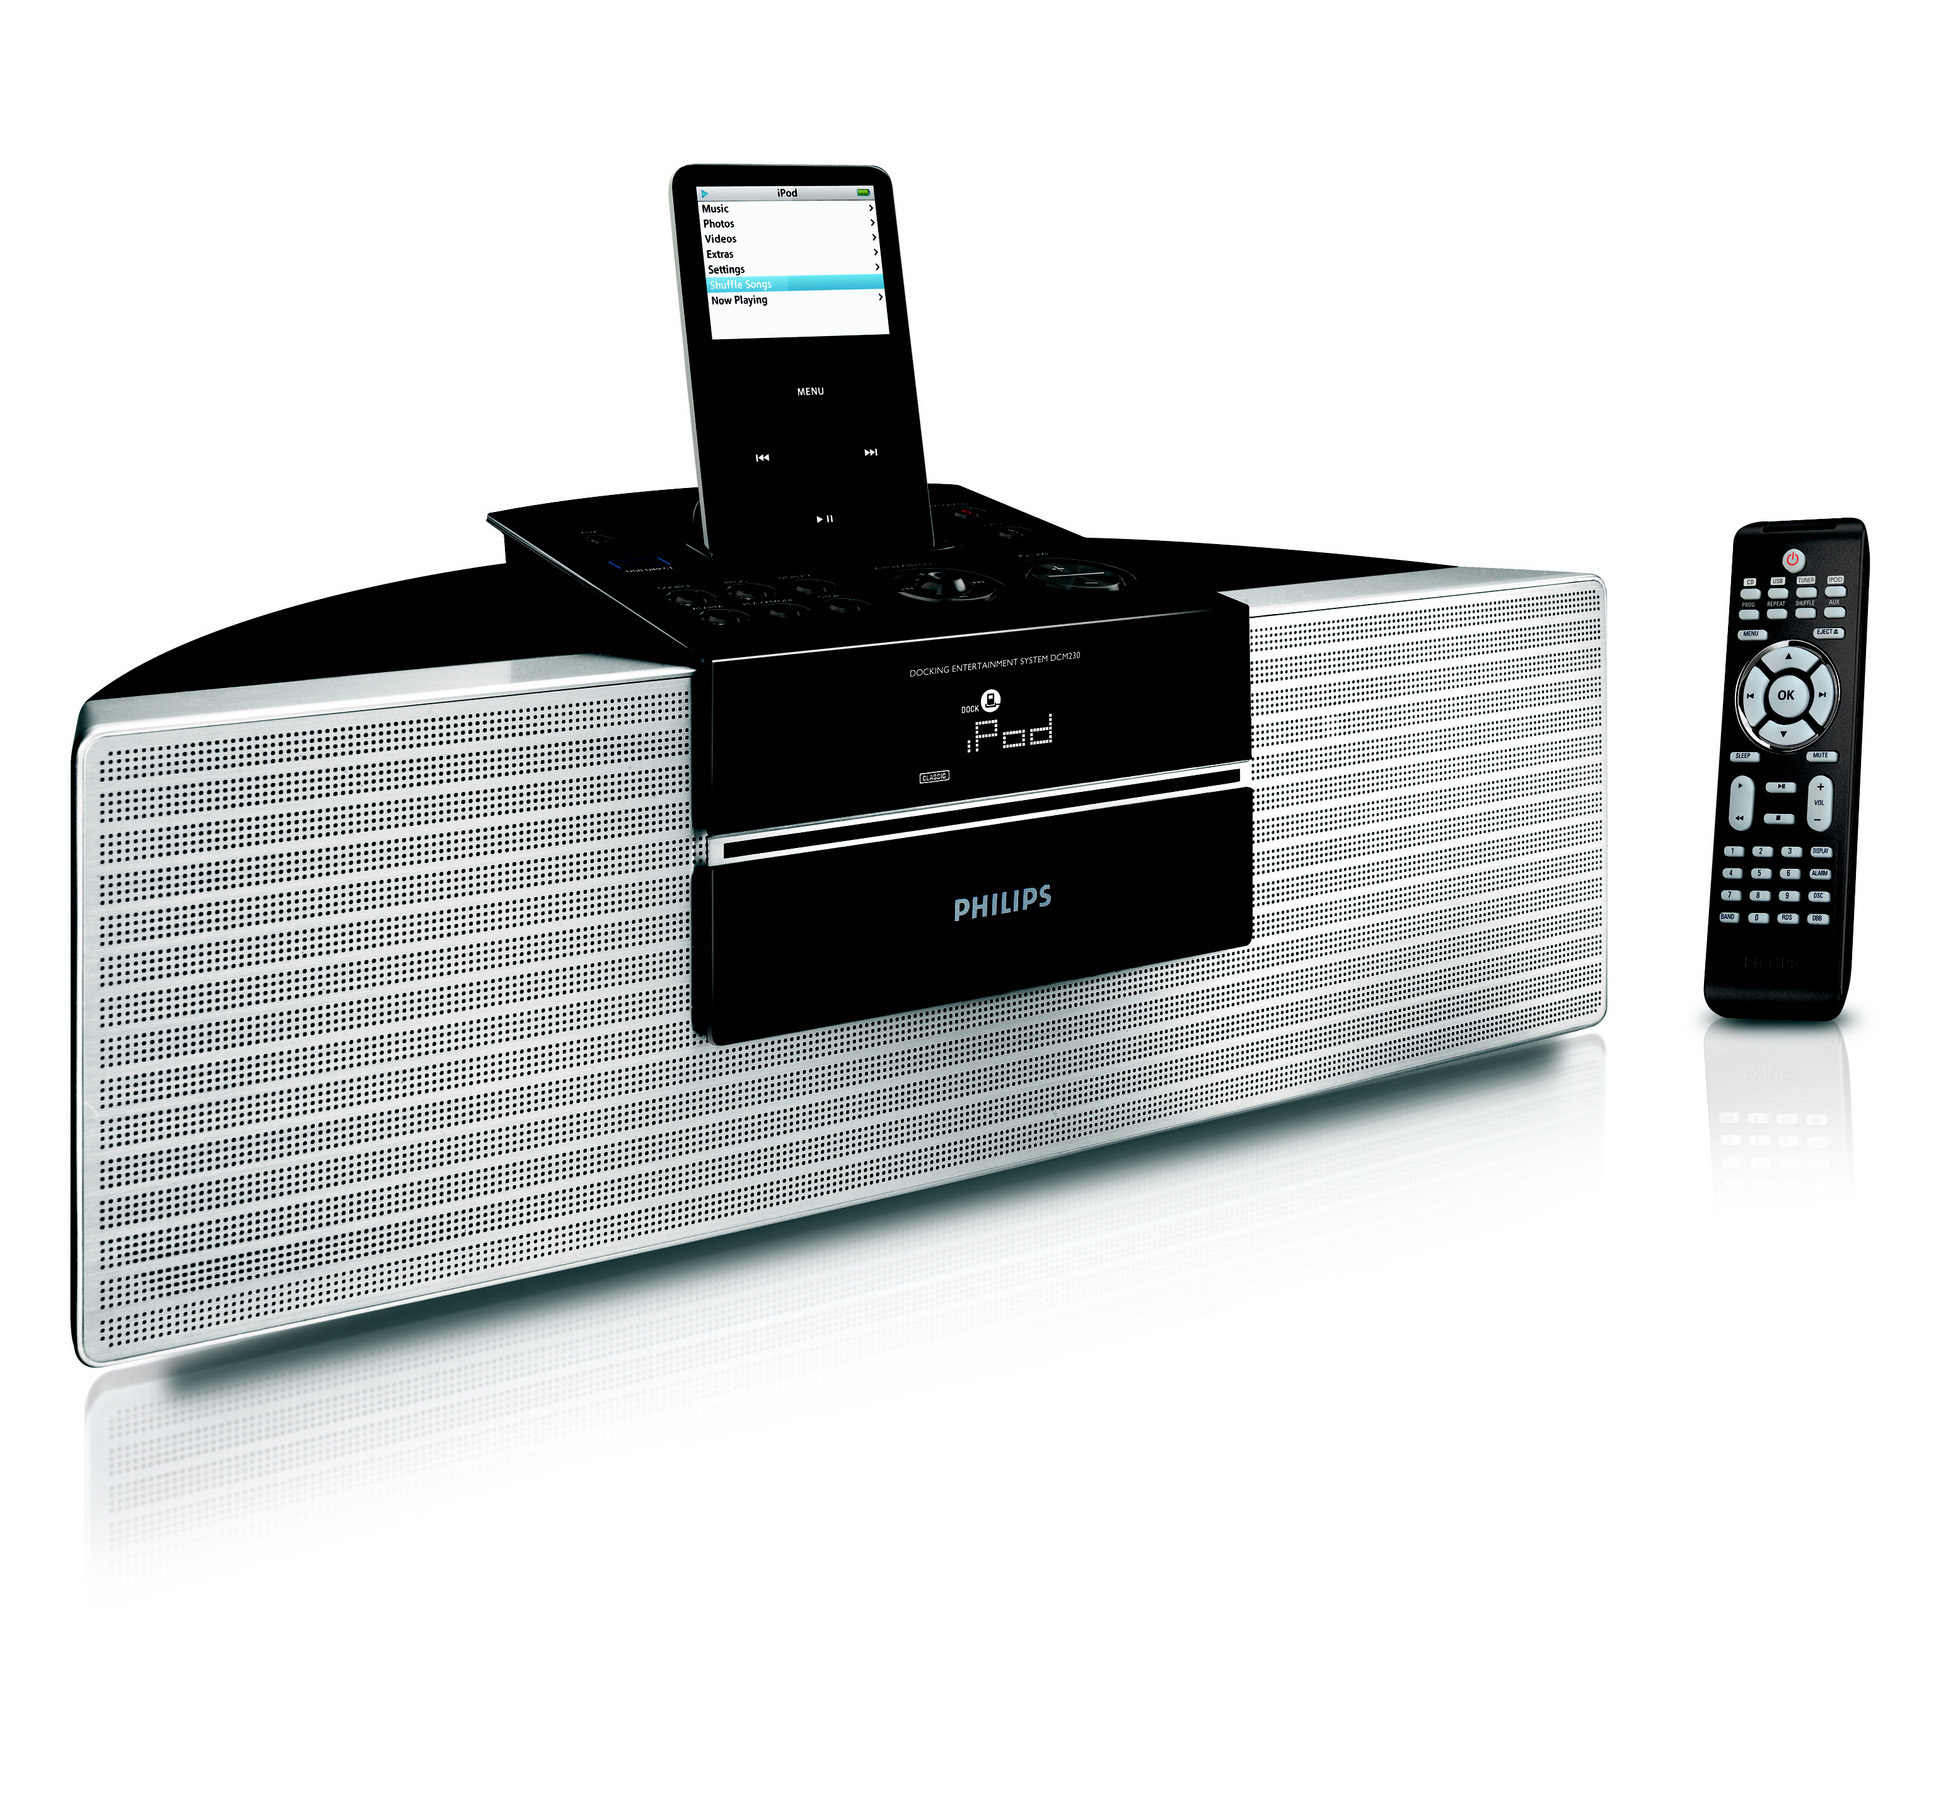 Docking Entertainment System DCM230 Register your product and get support at www.philips.